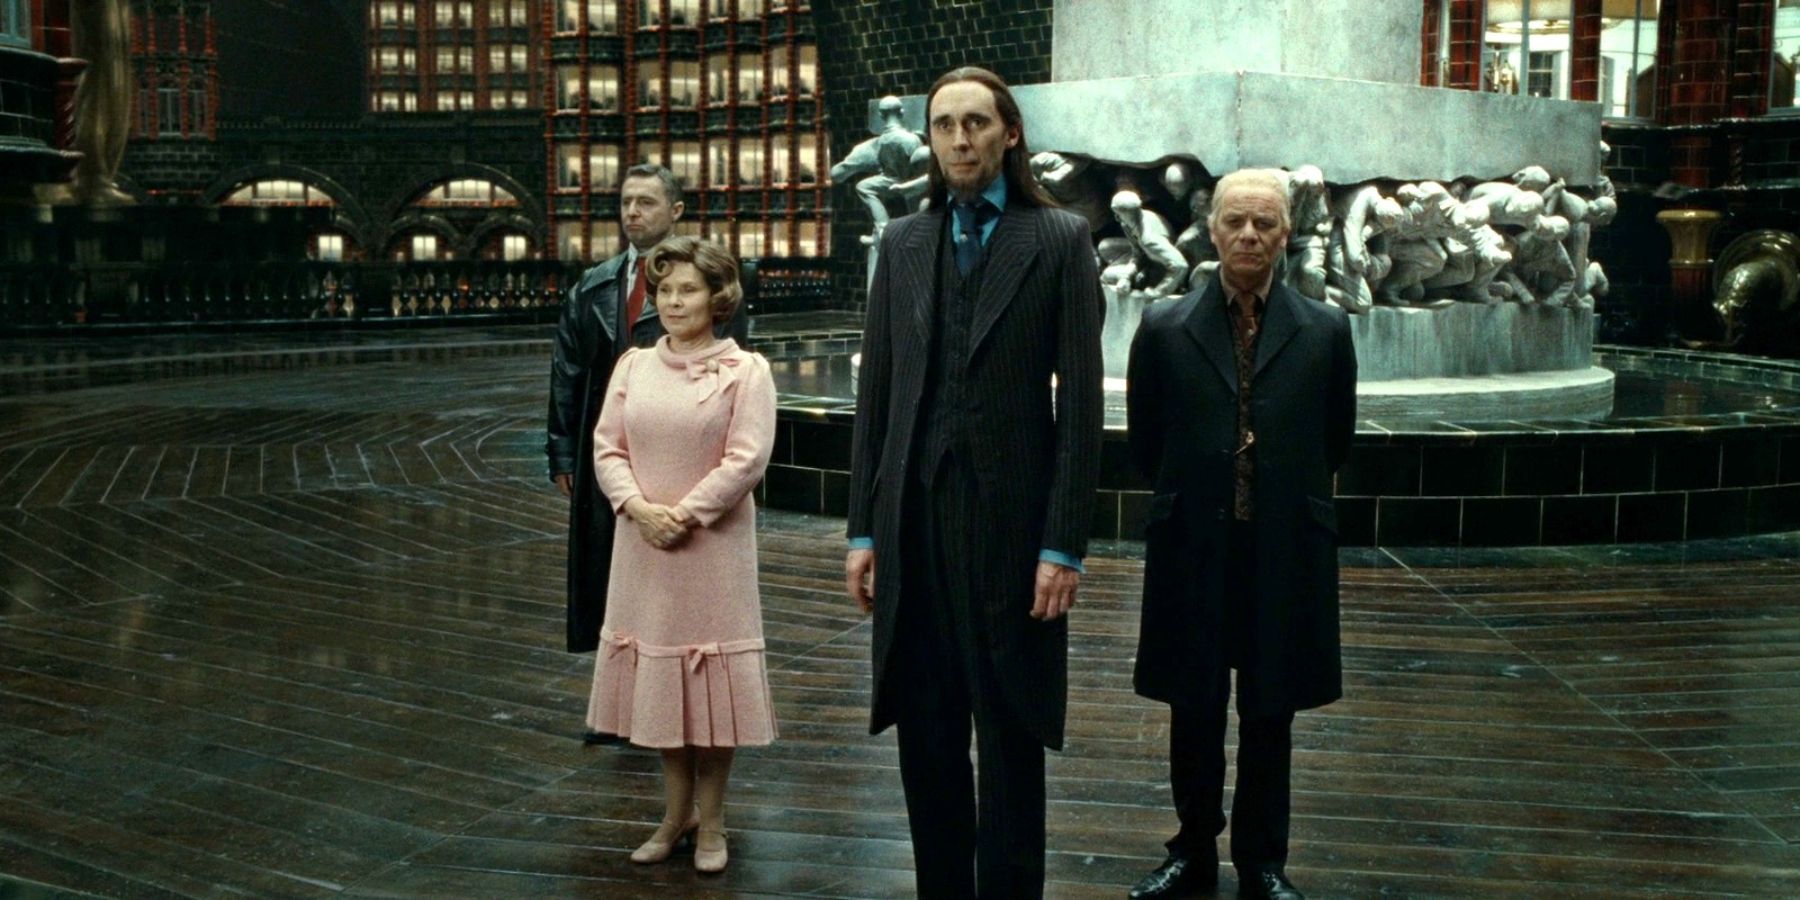 The members of The Ministry of Magic in Harry Potter